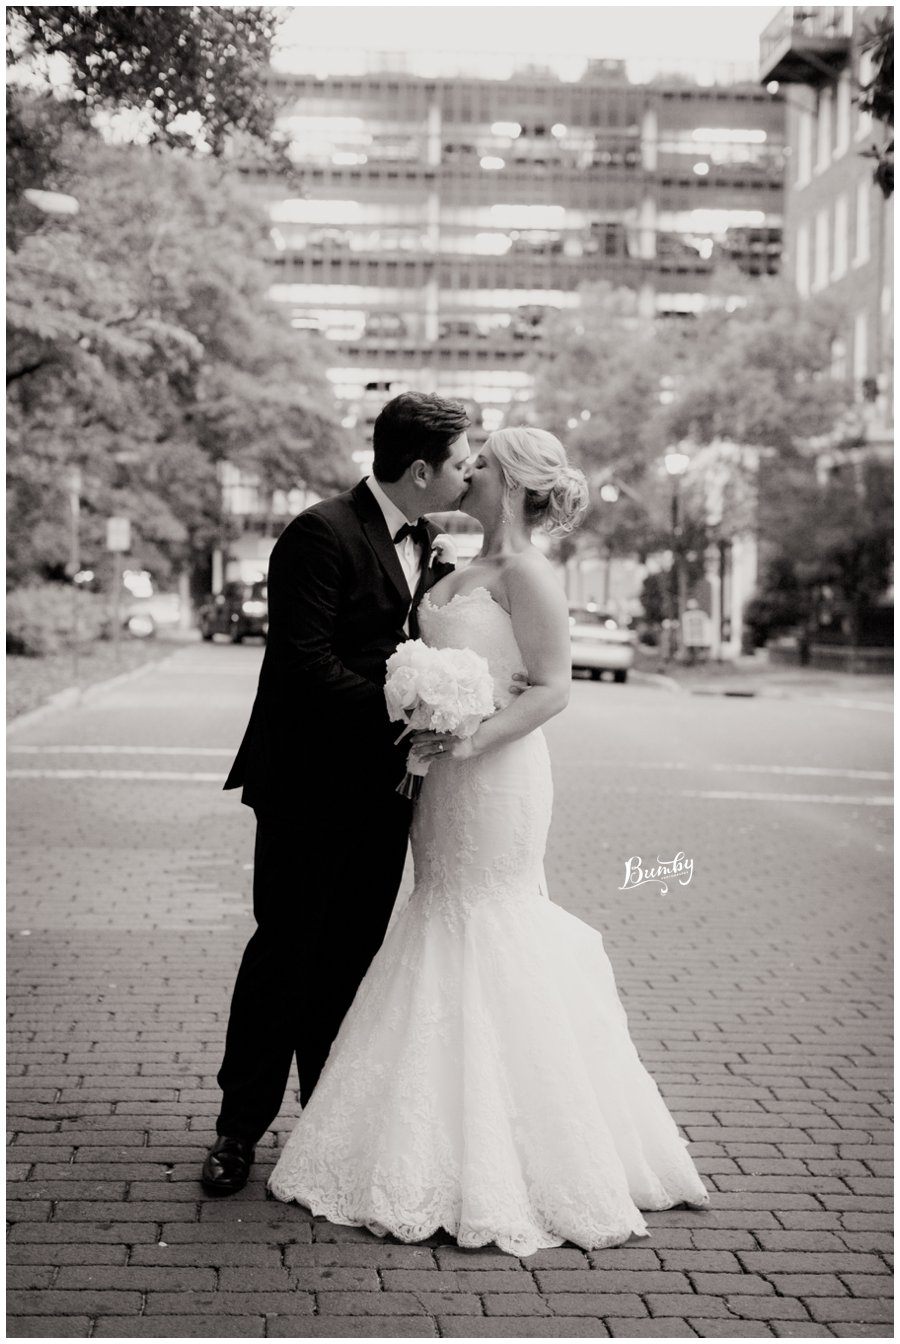 Bride and groom kissing in the middle of the streets of Savannah, Georgia.